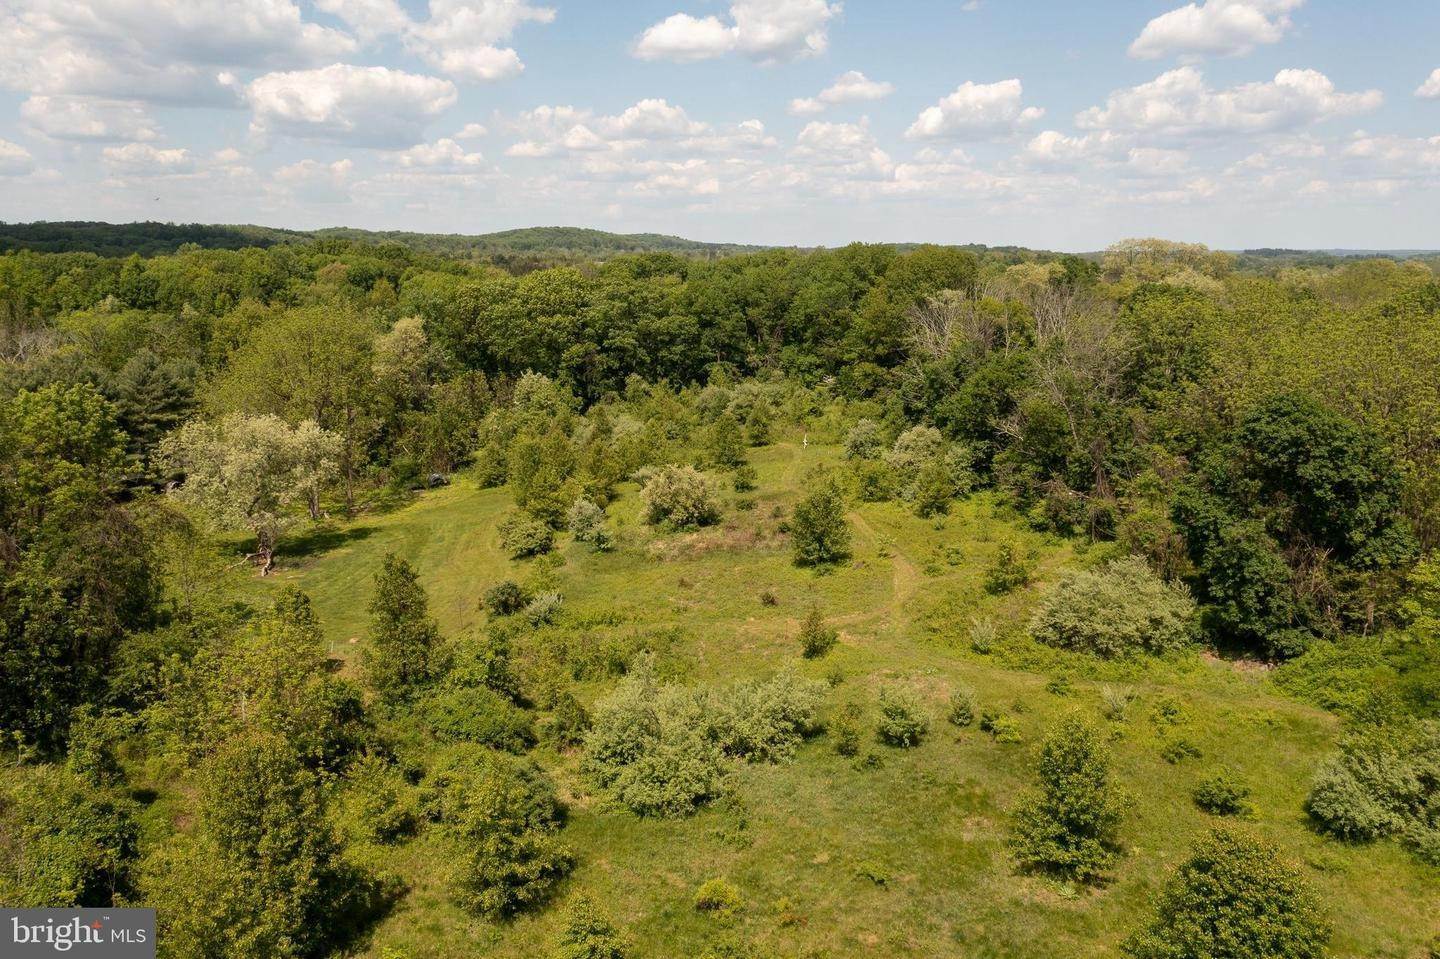 Land for Sale at DURHAM Road Doylestown, Pennsylvania 18902 United States